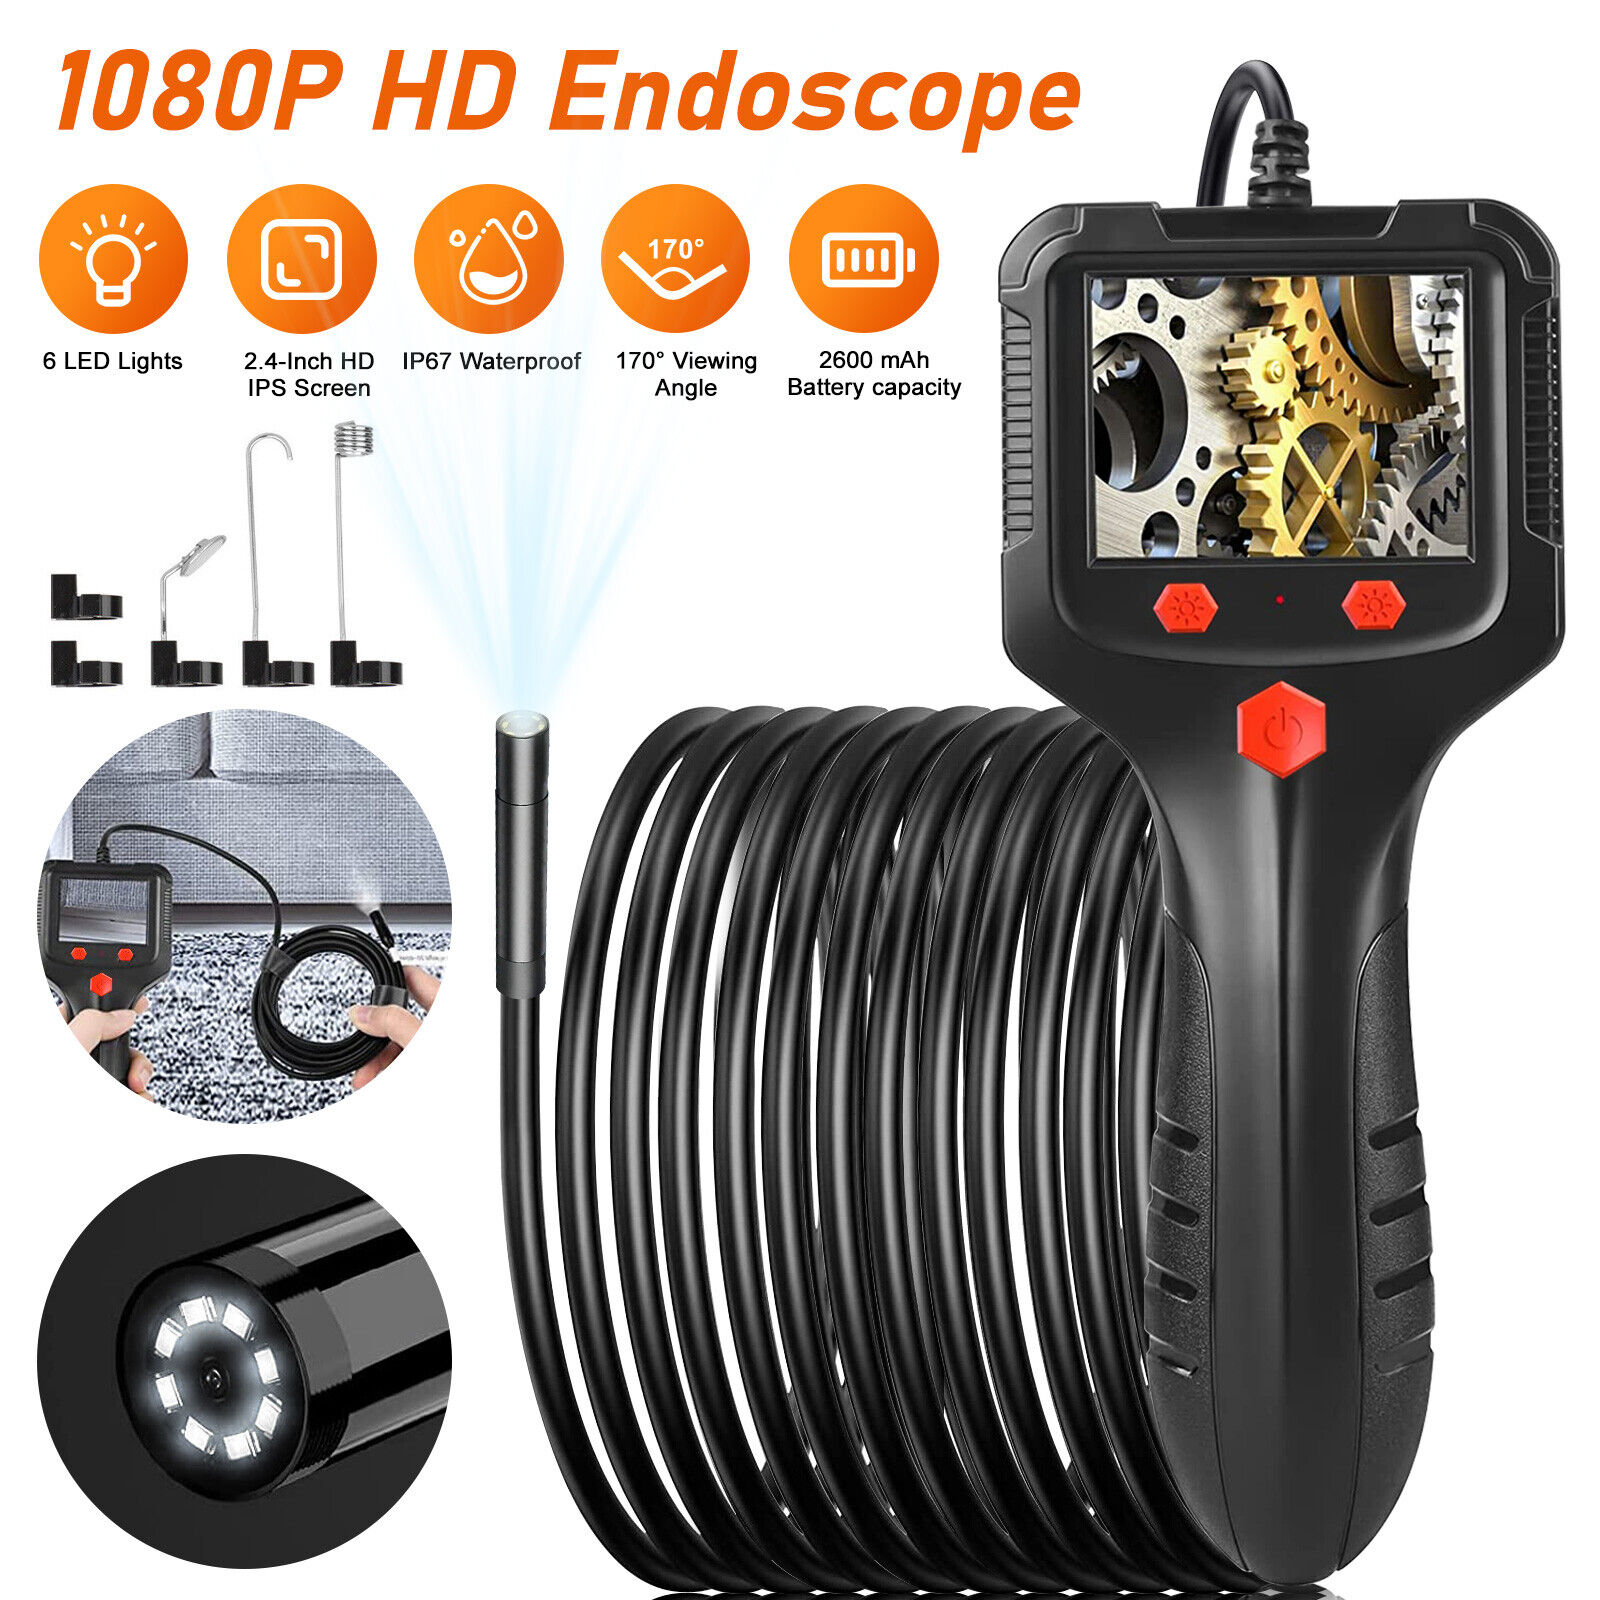 Led Hd Handheld Industrial Borescope Endoscope 2.4inch Inspection Snake Camera